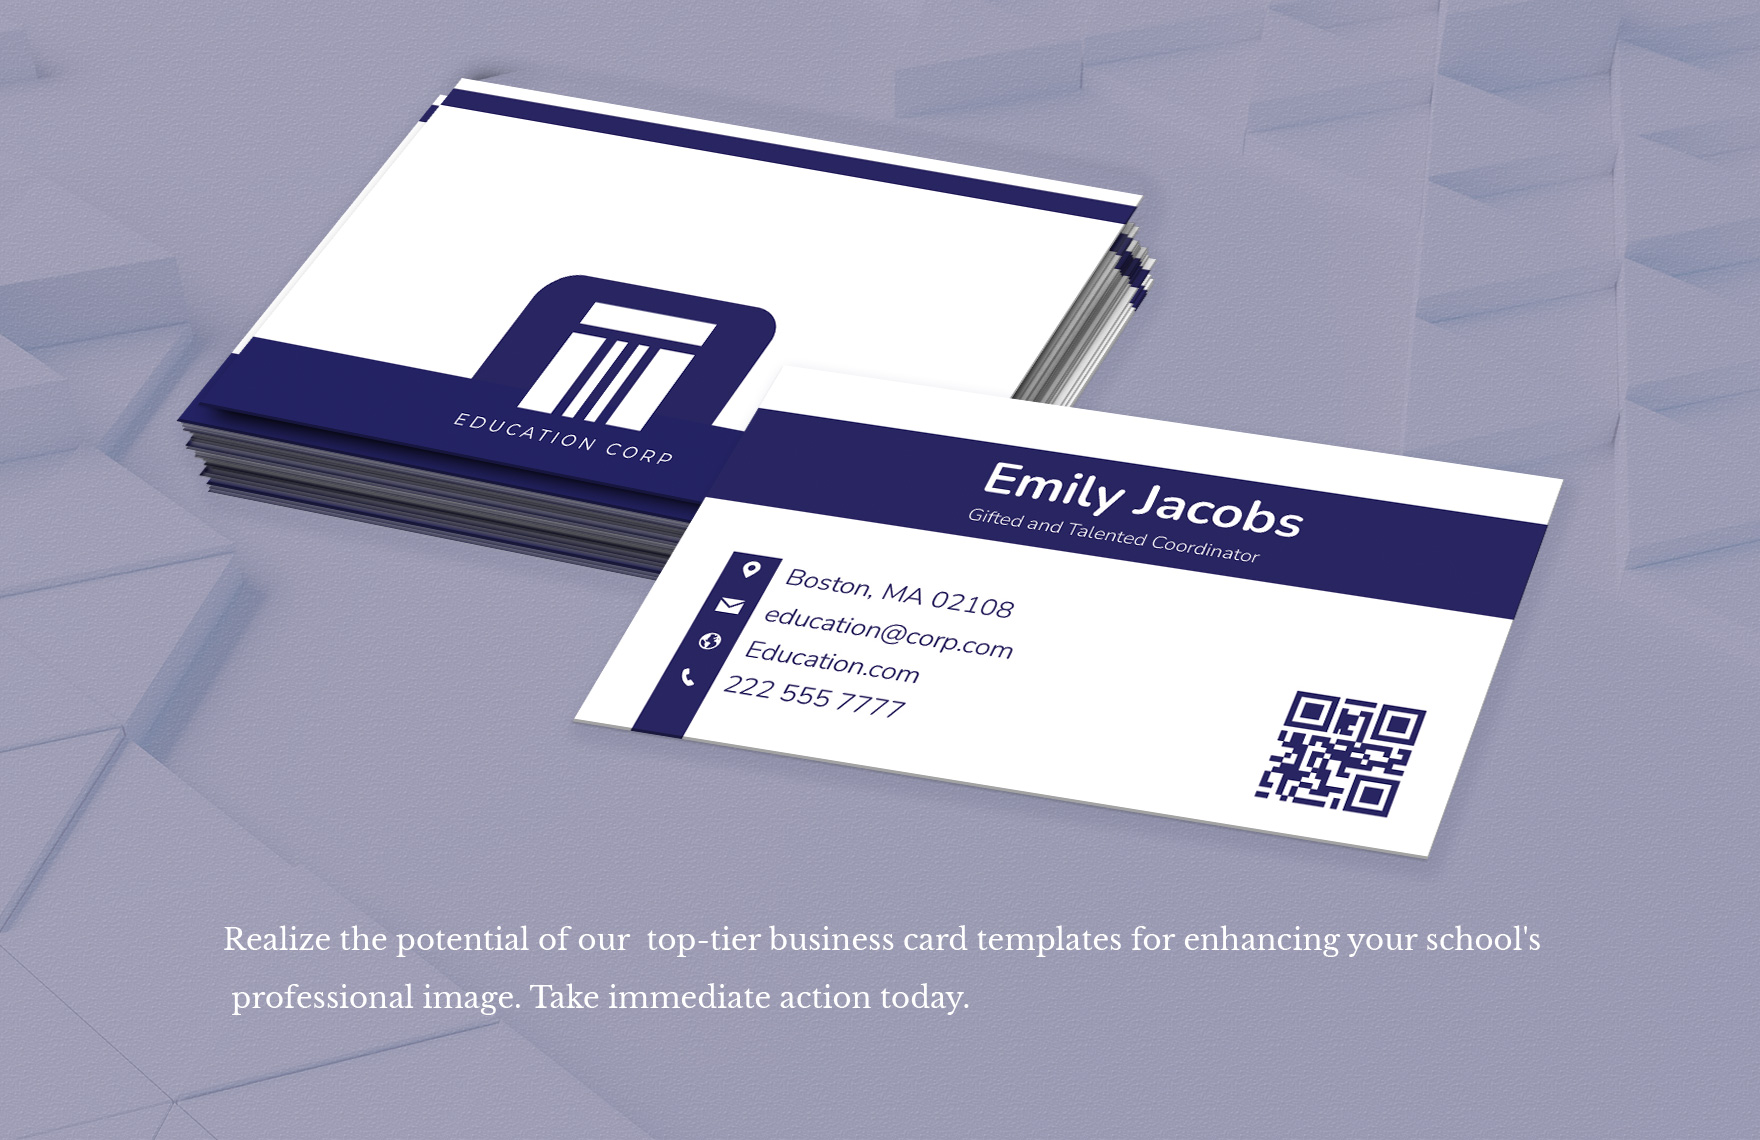 Gifted and Talented Coordinator Business Card Template